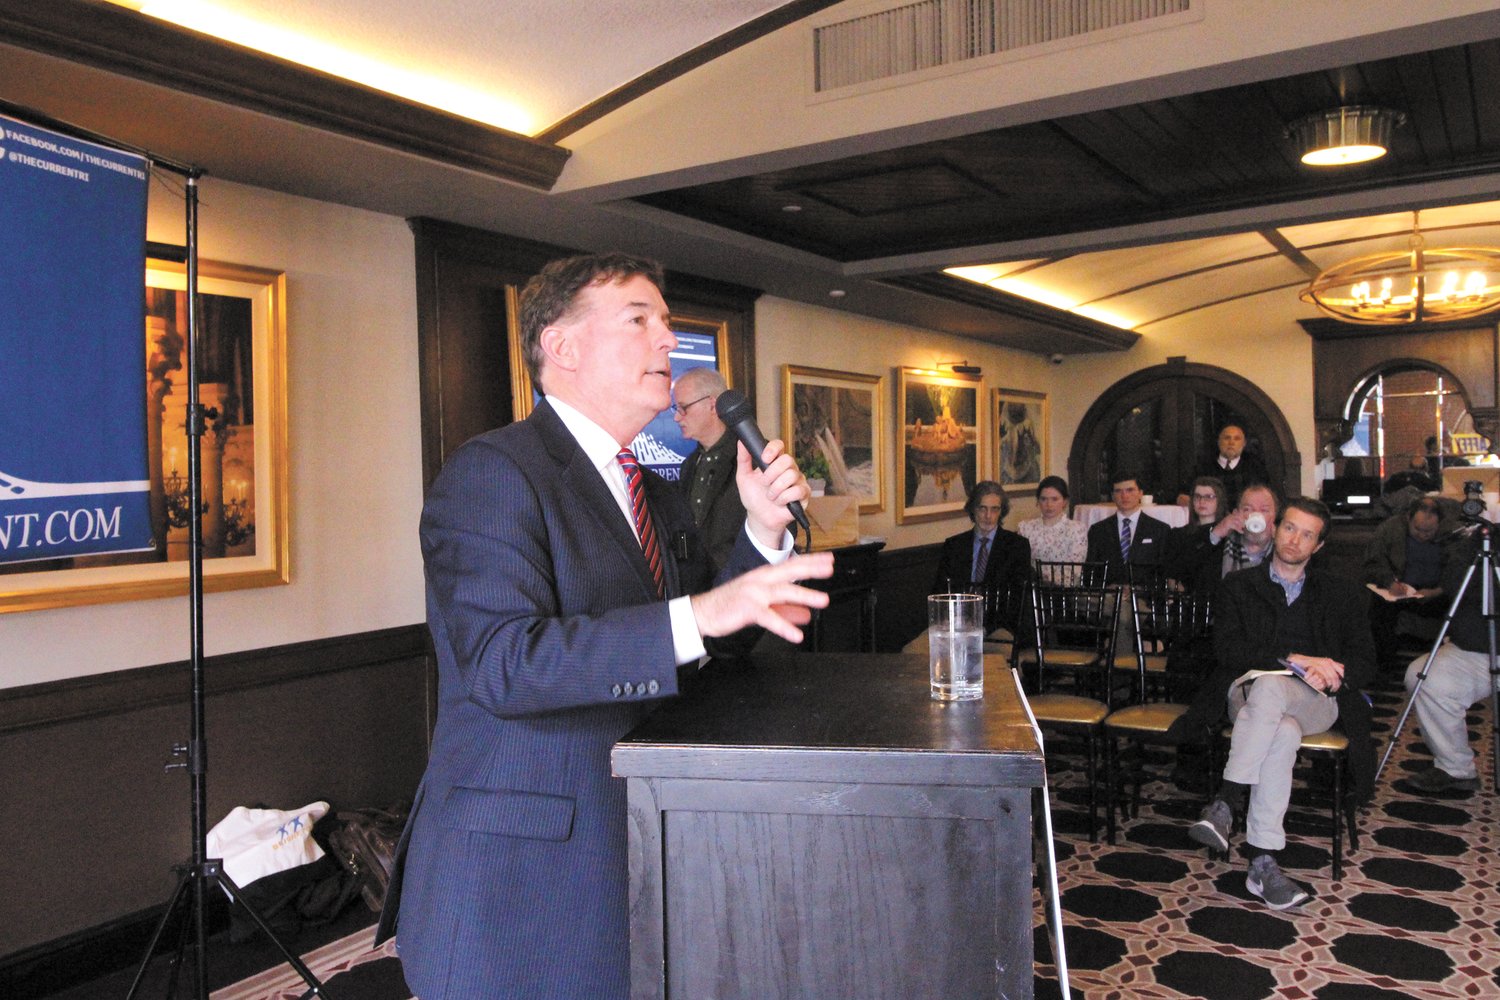 OUTLINING HIS PLATFORM: Former Cranston mayor Steve Laffey who has announced as a Republican candidate for president  addressed an audience of about 30 people Friday at the Chapel View Grille.  (Cranston Herald photo)